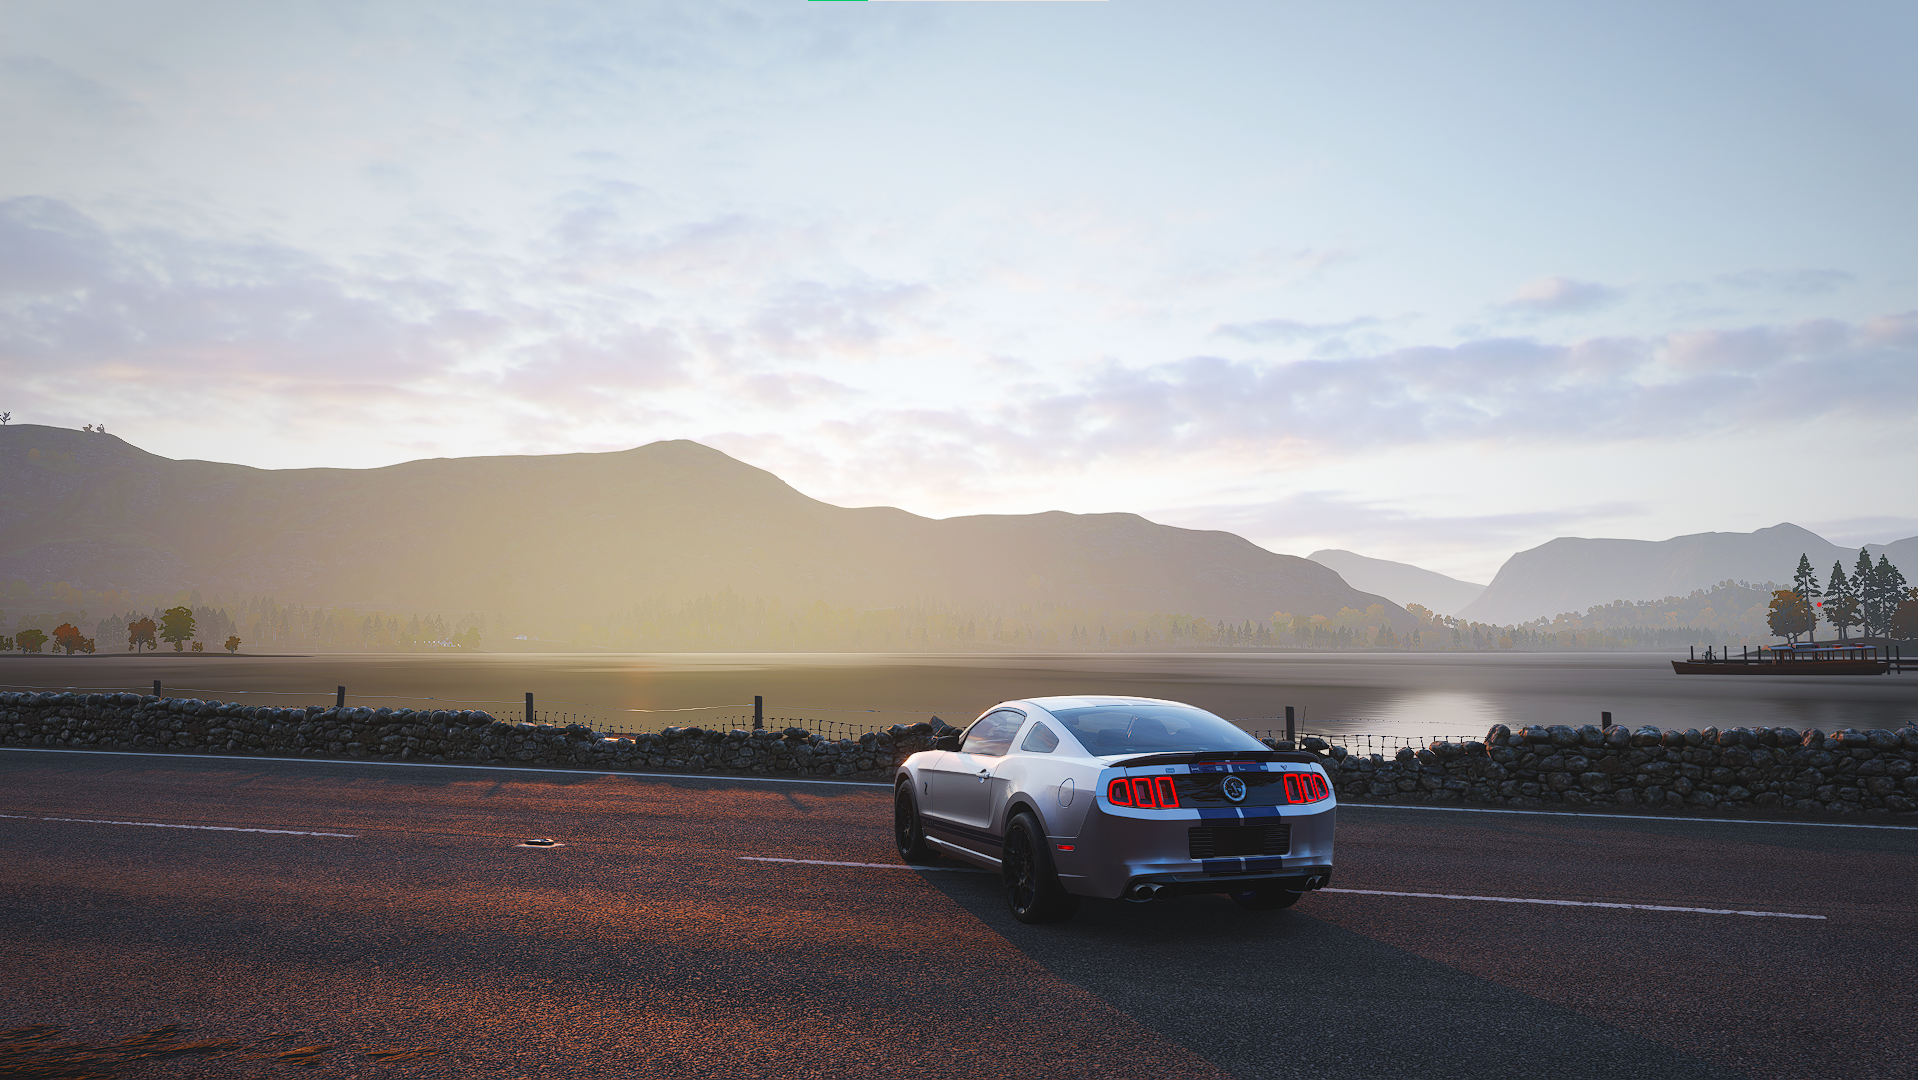 General 1918x1080 Horizon Festival car rear view Forza Horizon 4 Ford Ford Mustang Shelby muscle cars pony cars American cars digital art video games Ford Mustang Shelby sky clouds PlaygroundGames Turn 10 Studios taillights racing stripes vehicle Xbox Game Studios CGI video game art screen shot road